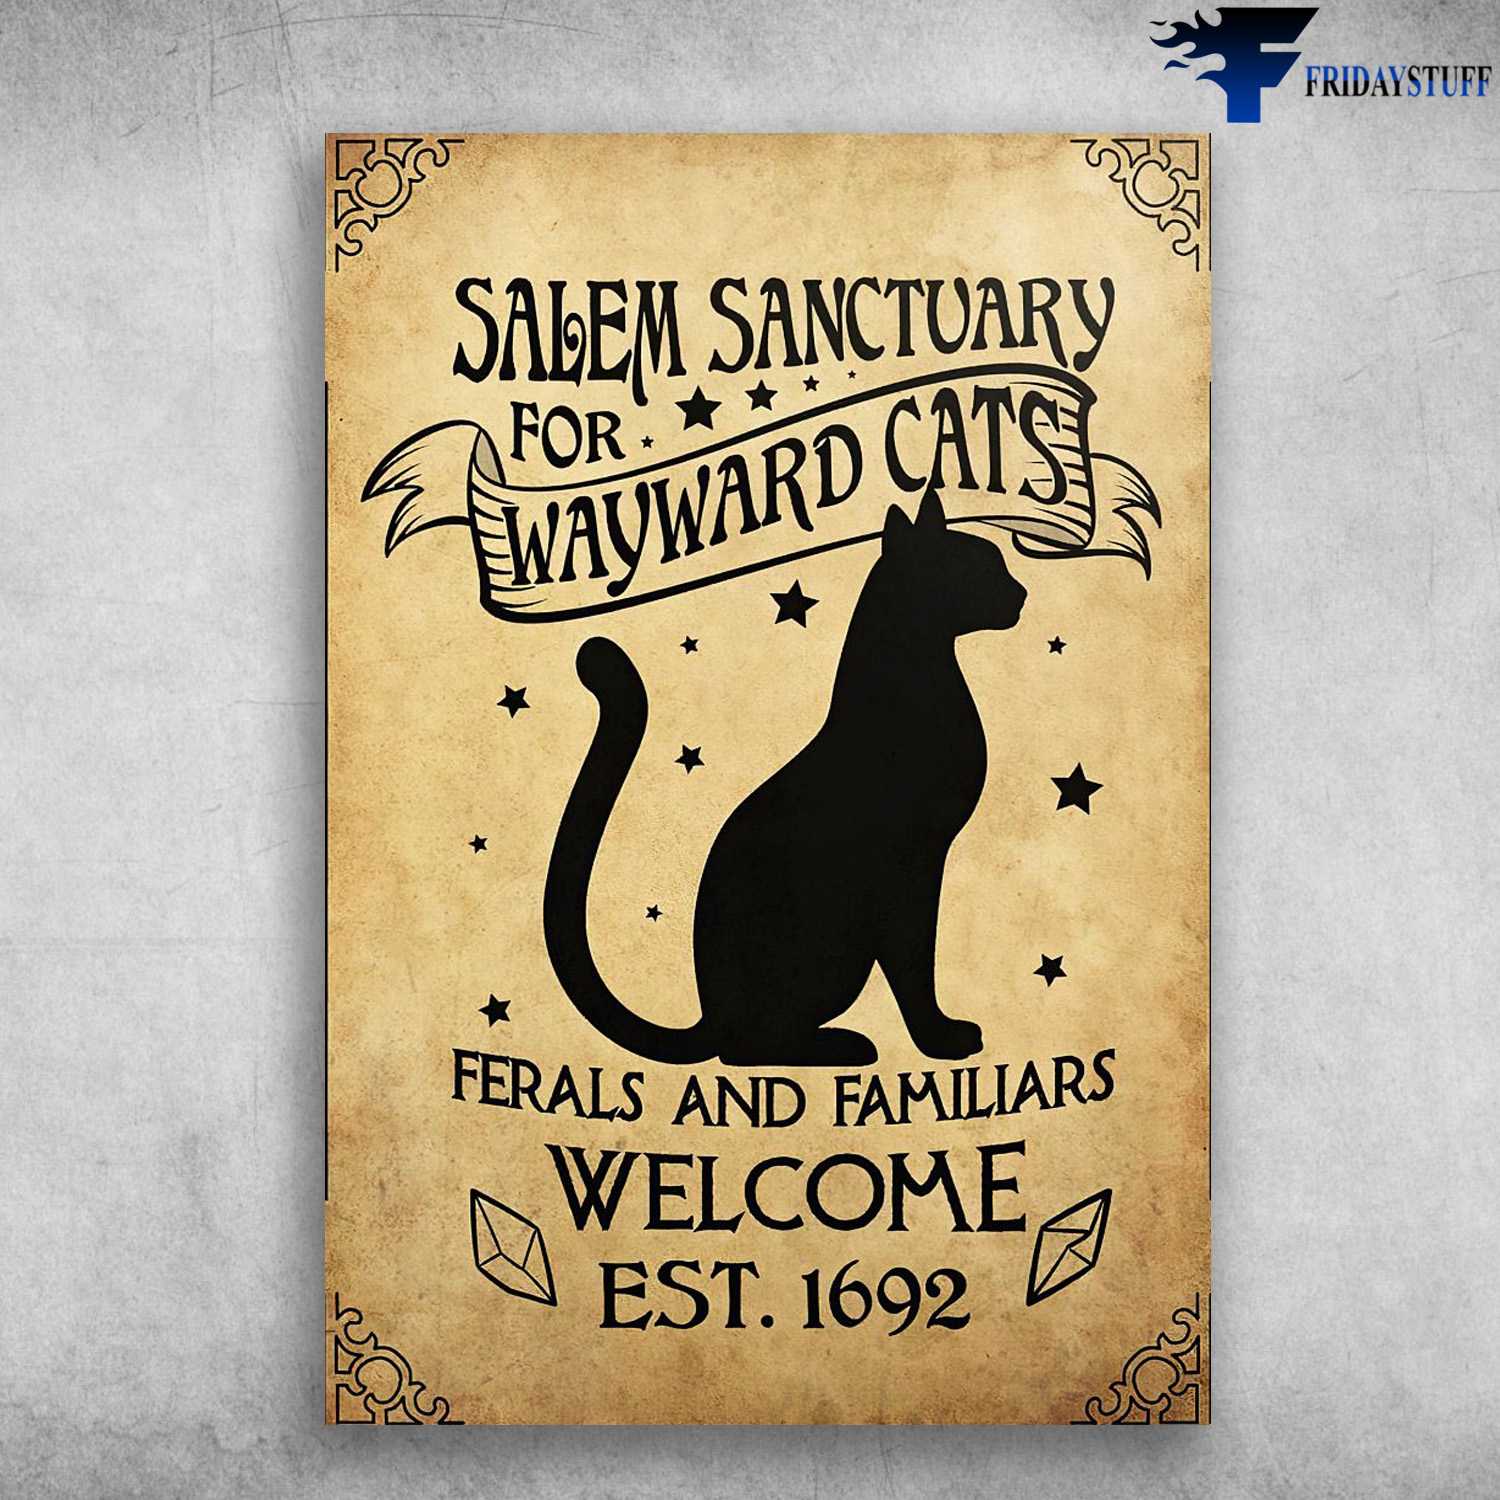 Witch Poster, Black Cat, Salem Sanctuary, For Wayward Cats, Ferals And Familiars